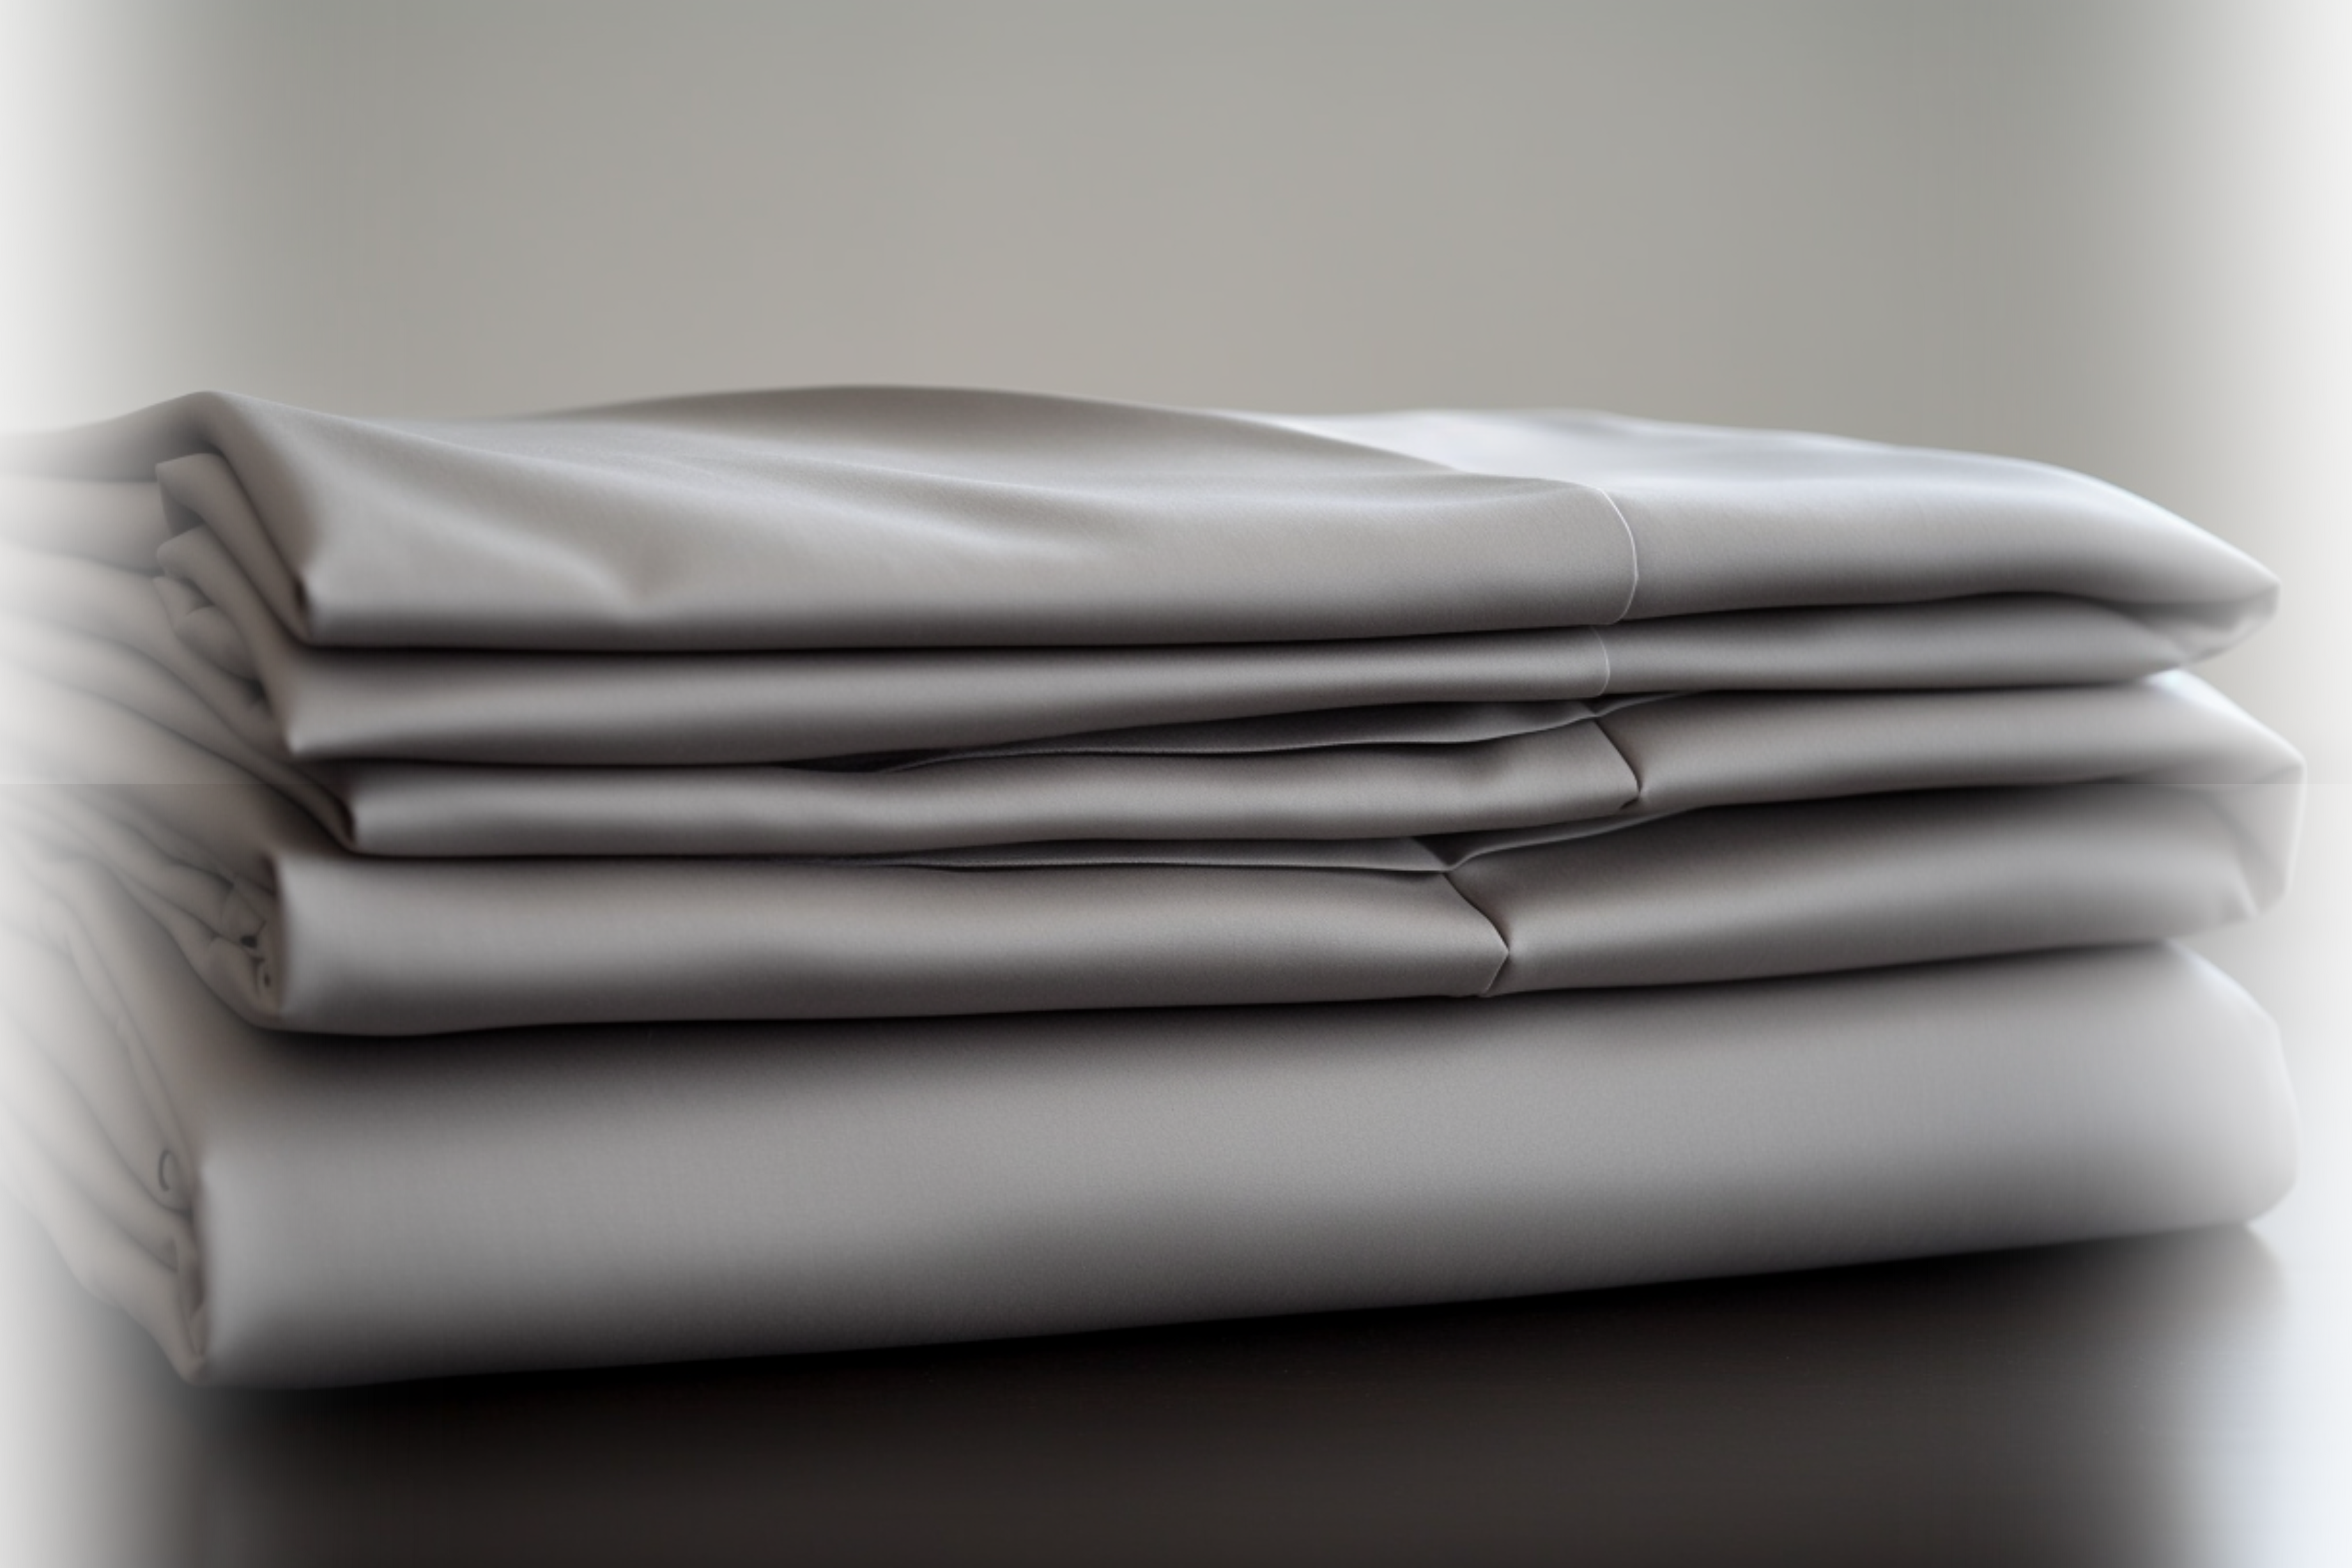 Sleep like royalty with these microfiber sheets! Say goodbye to rough , Bedding